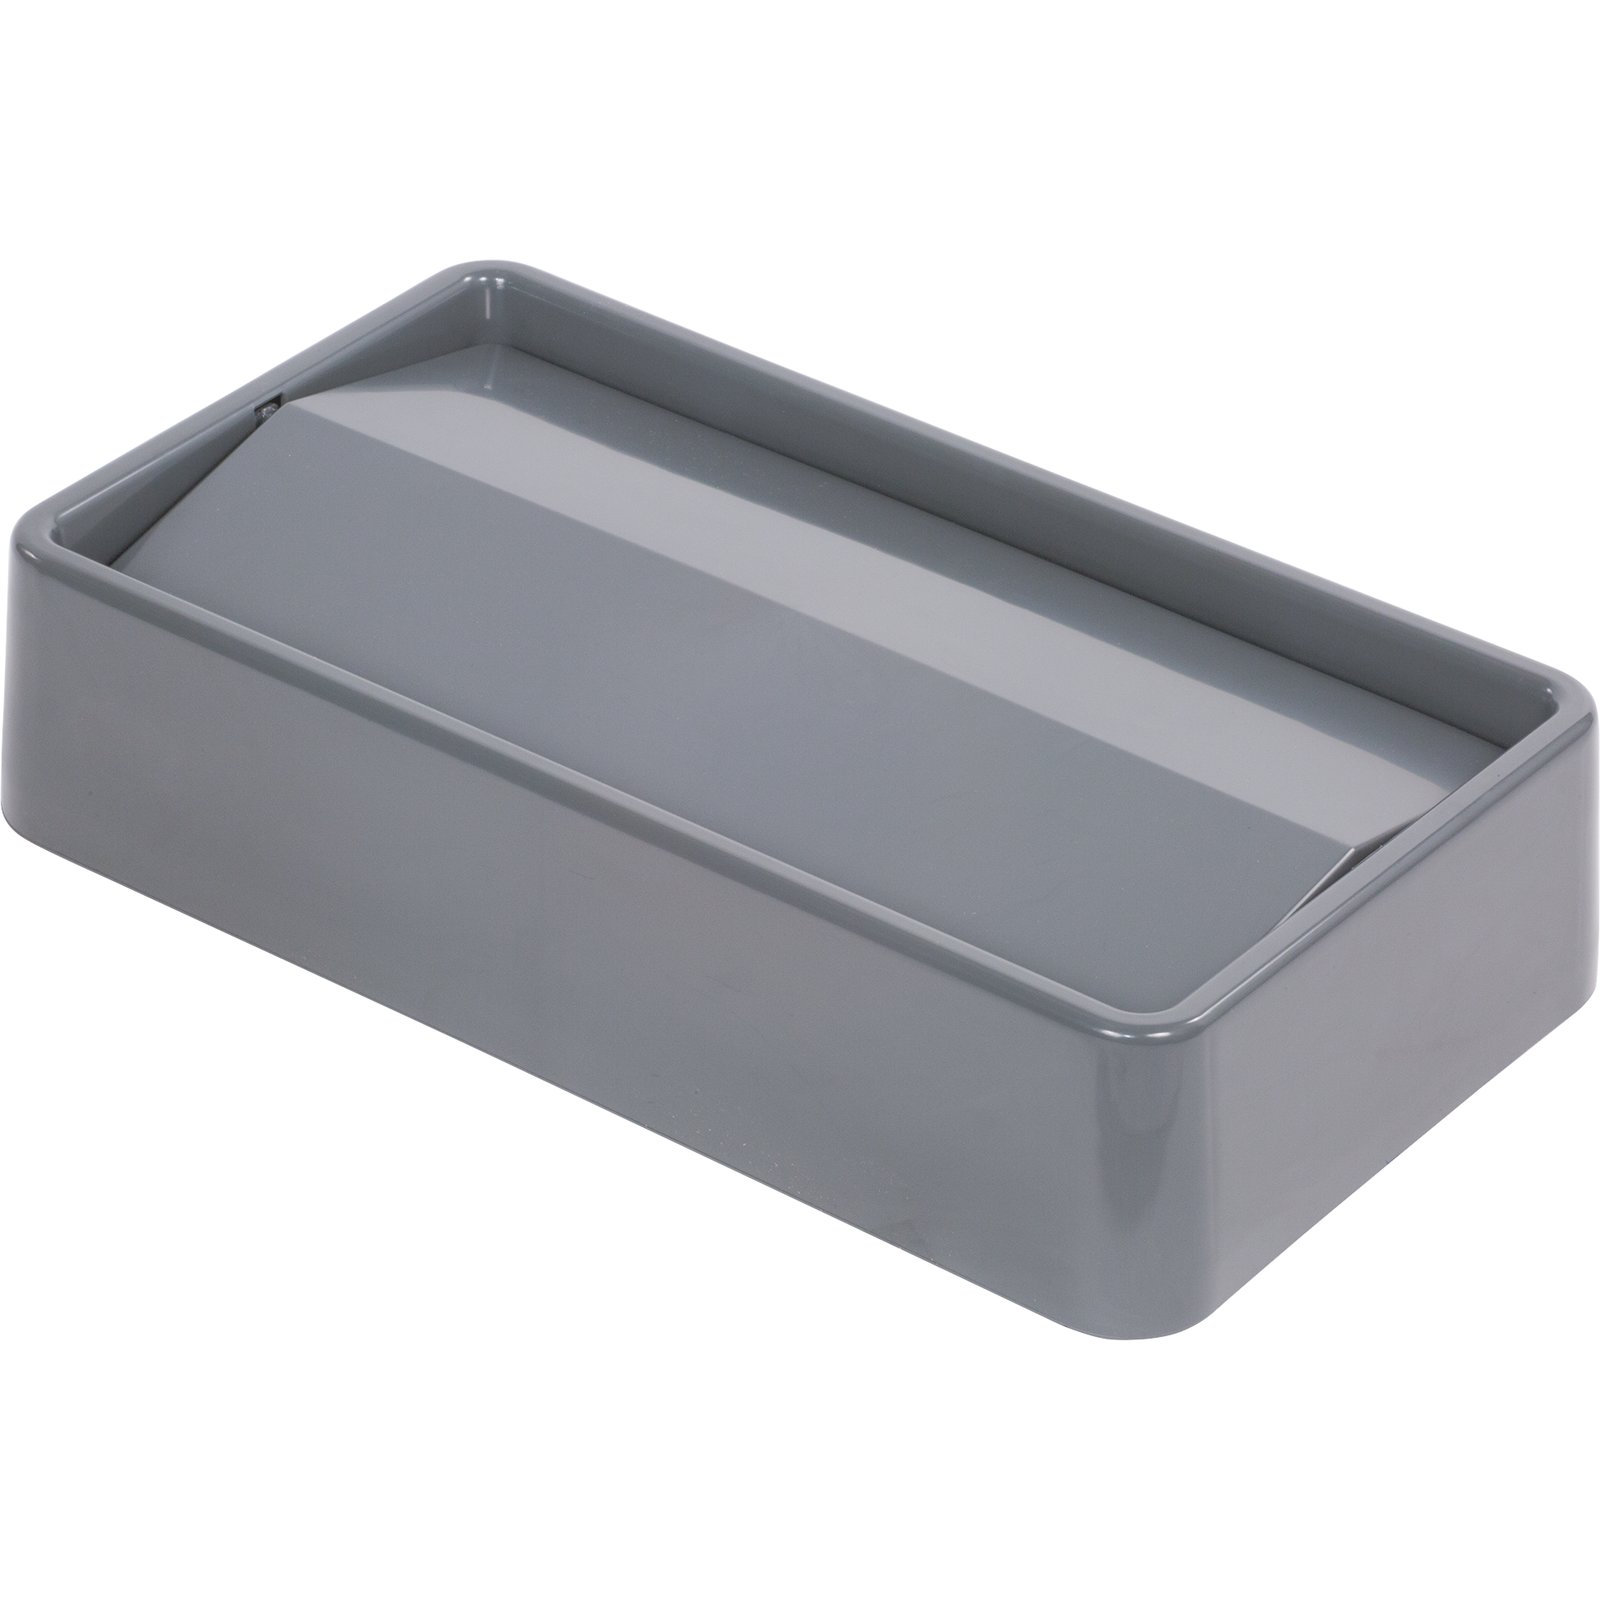 Buying guide for M&M DP-4824 - Drain Pan with PVC, 48 X 24, 26 Gauge